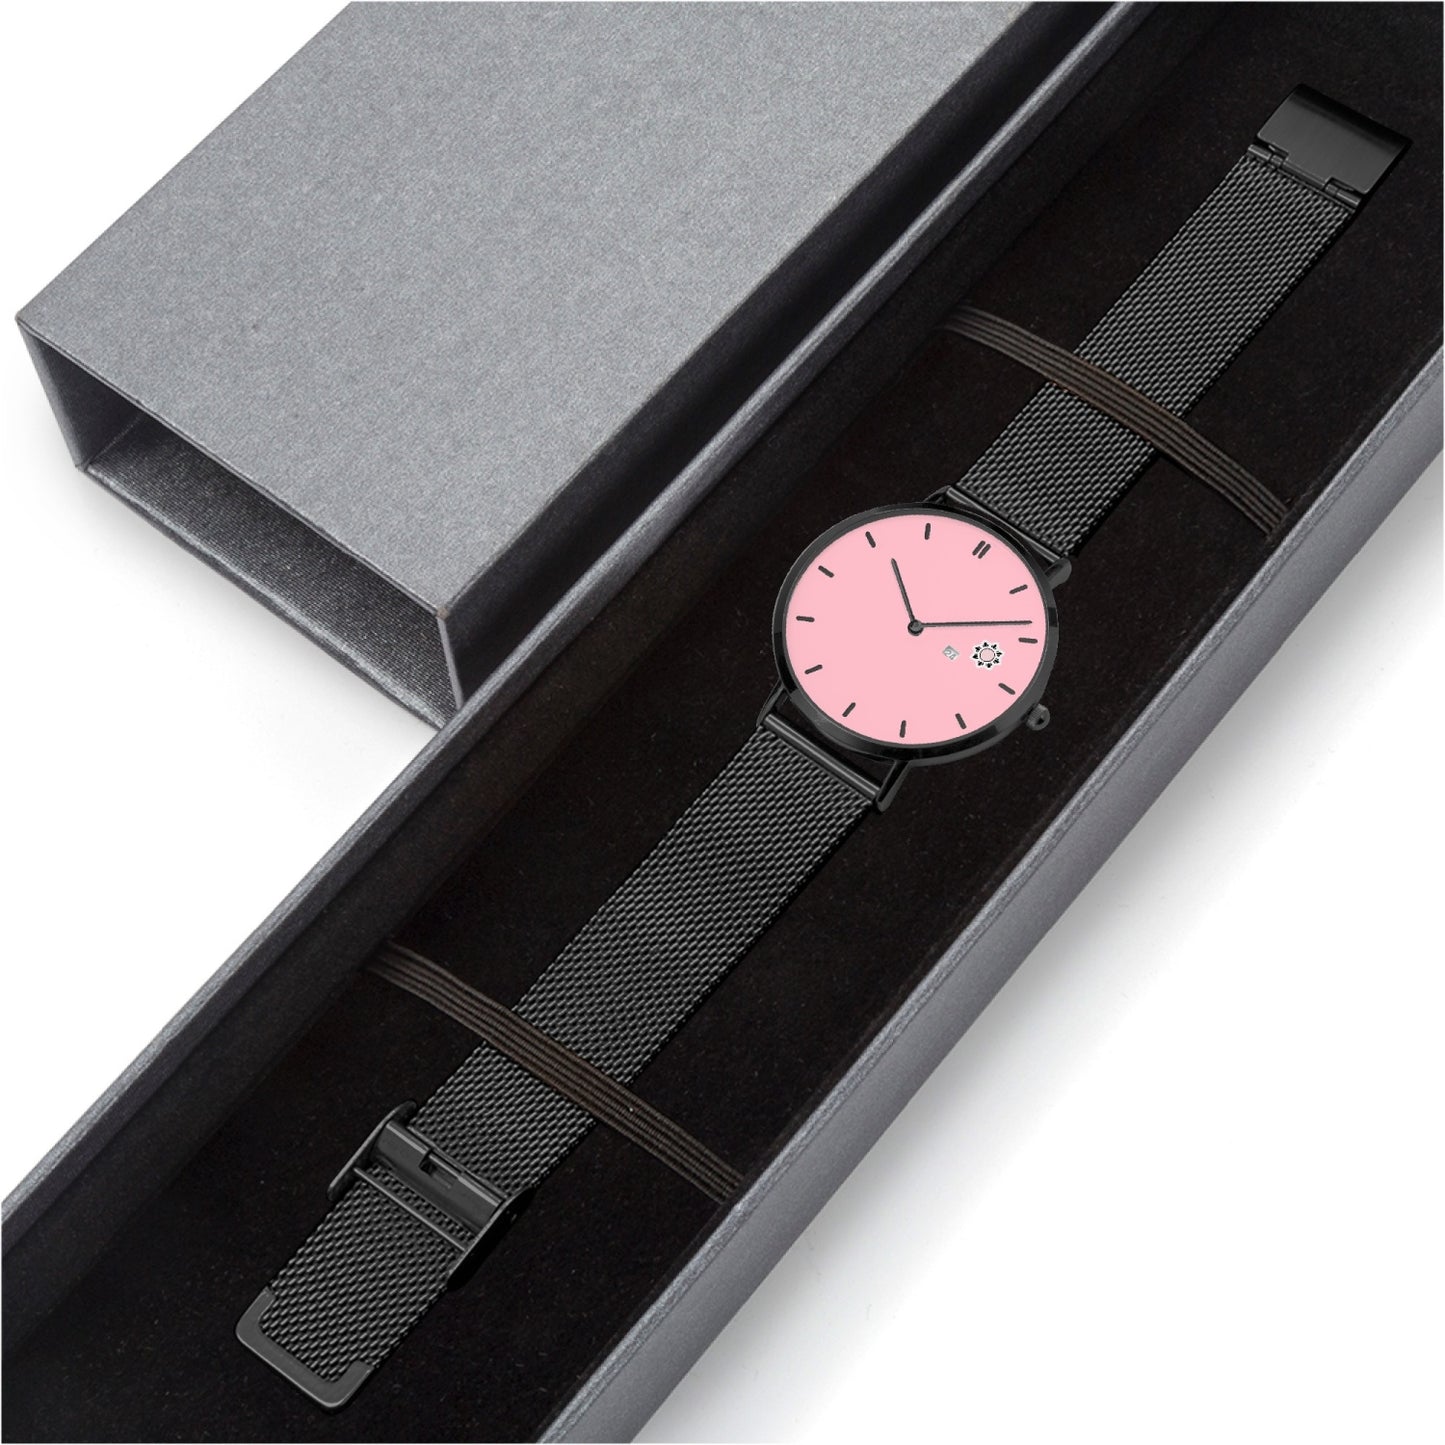 Stainless Steel Perpetual Calendar Quartz Watch (With Indicators), Gifts for her